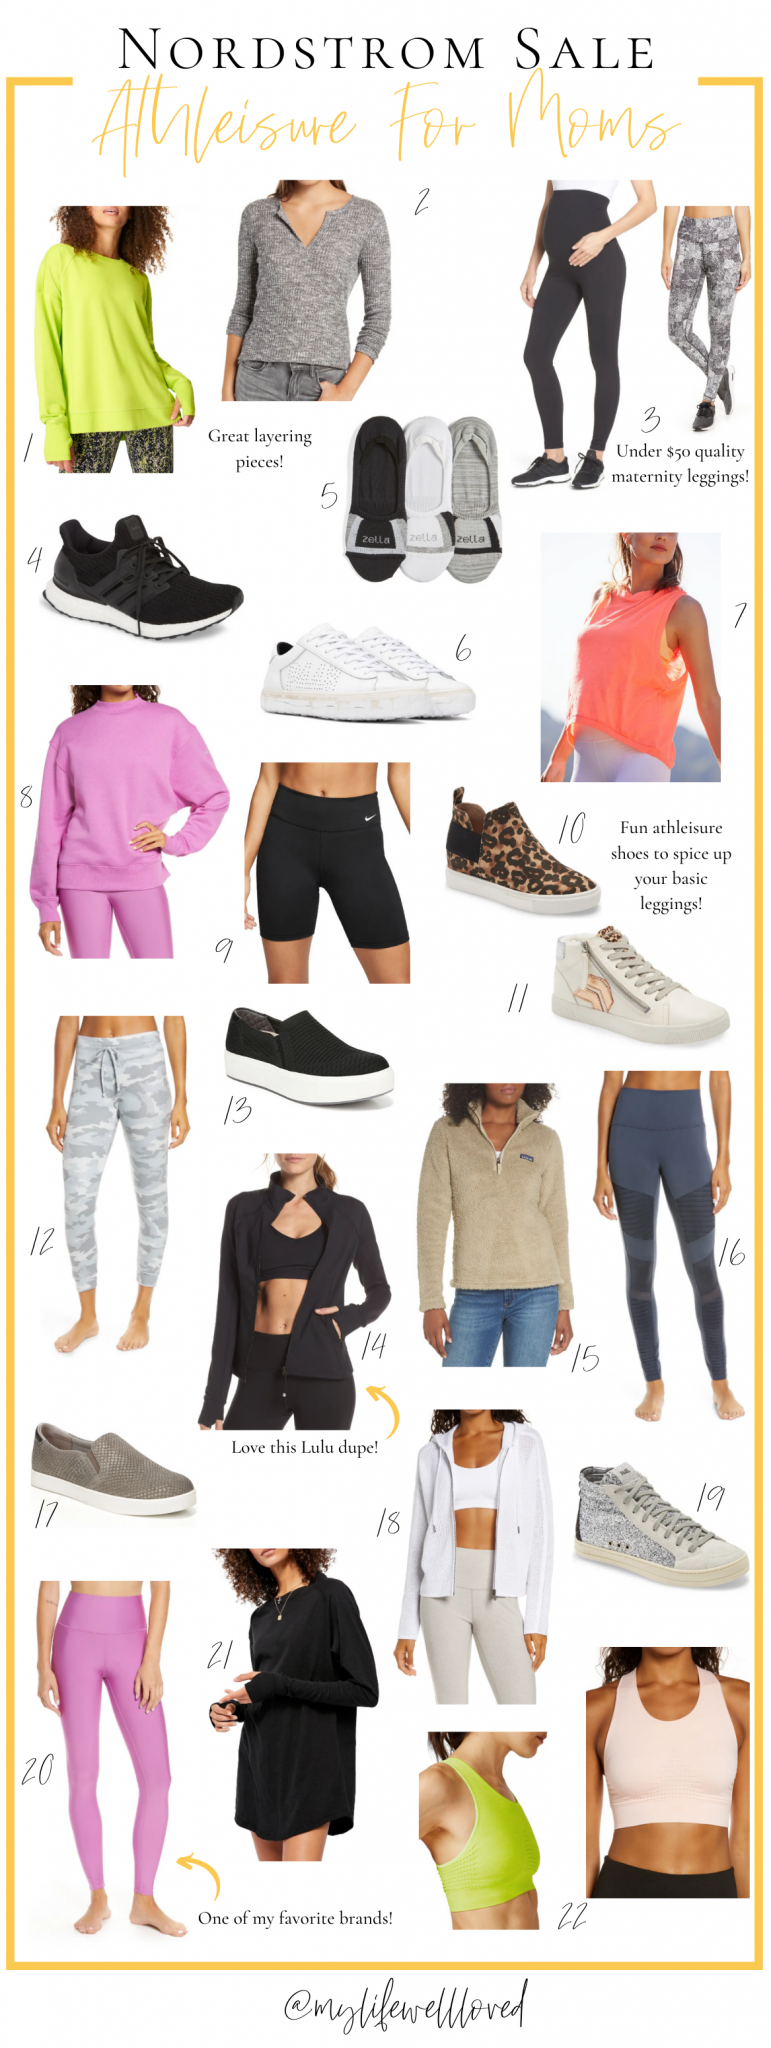 Nordstrom Anniversary sale: Best-selling Zella joggers are $22 off